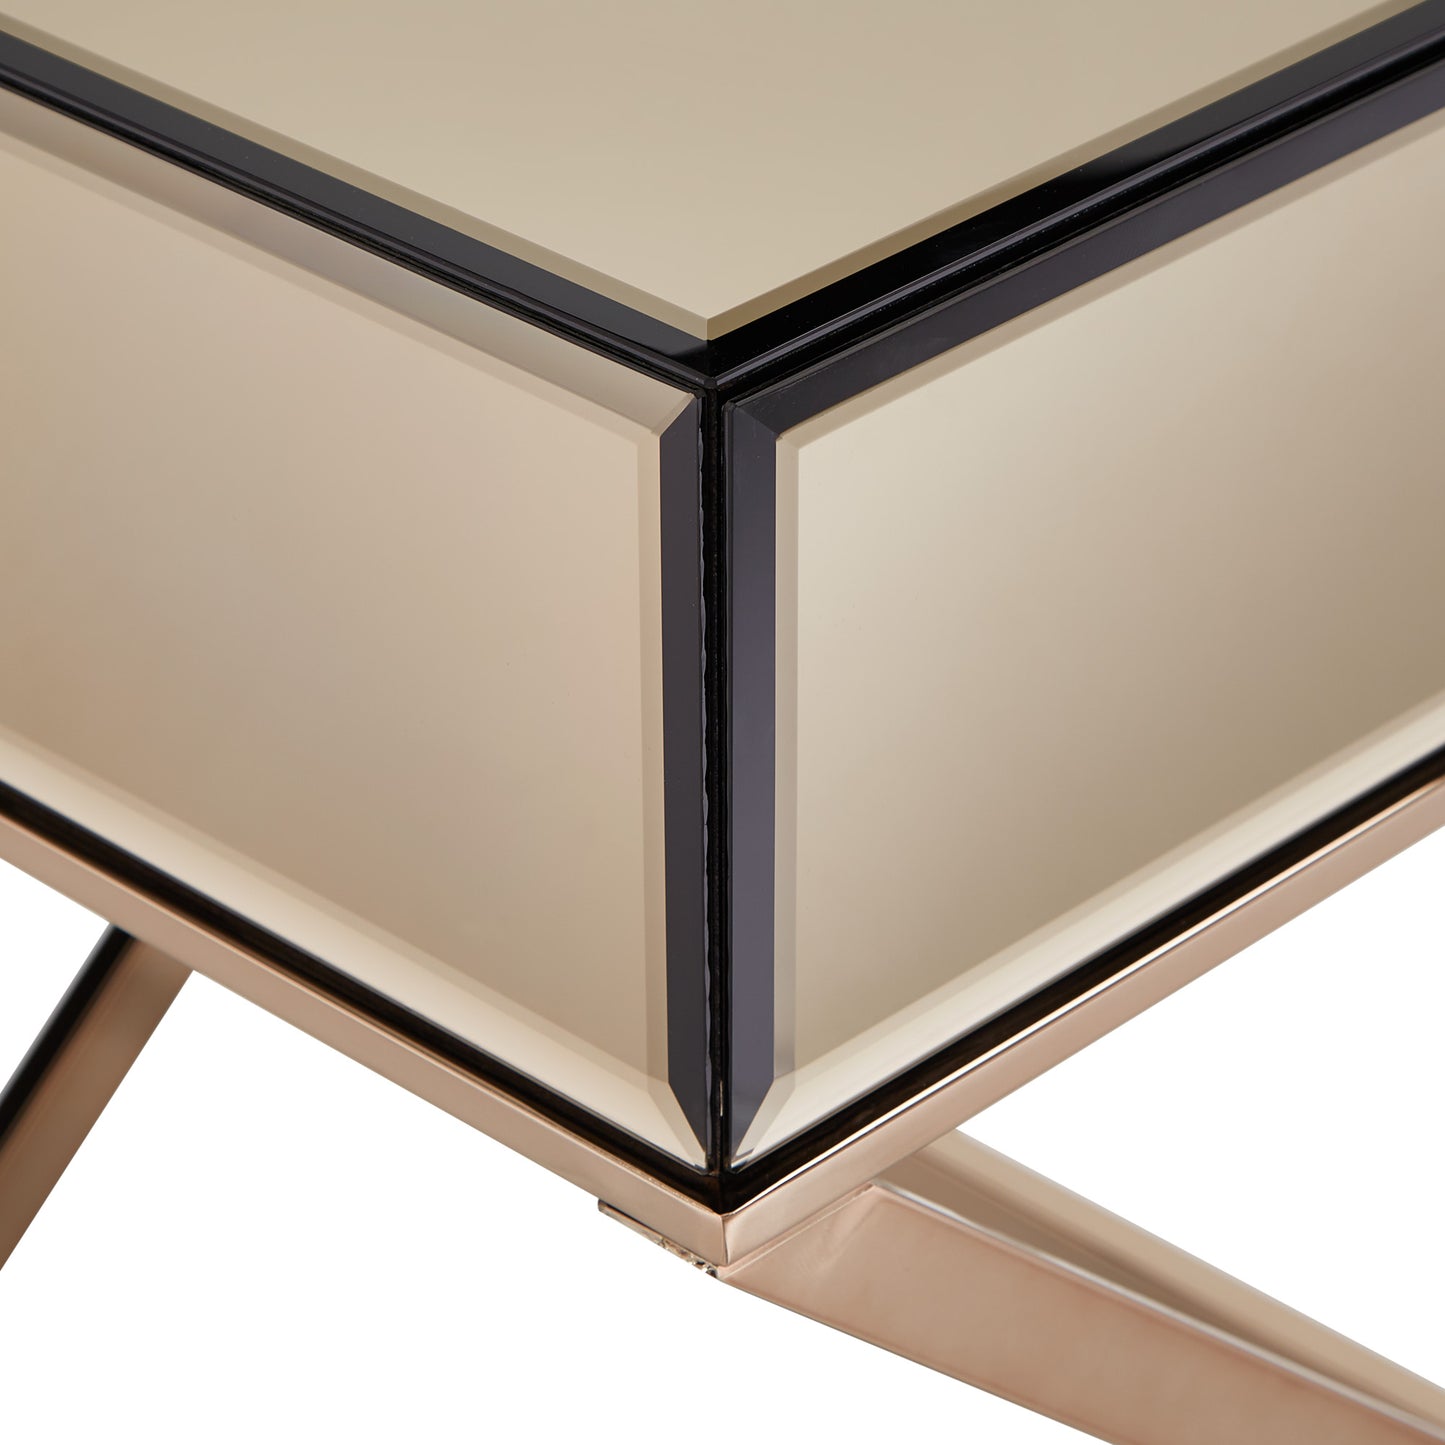 X-Base Mirrored Accent Campaign Table - Champagne Gold